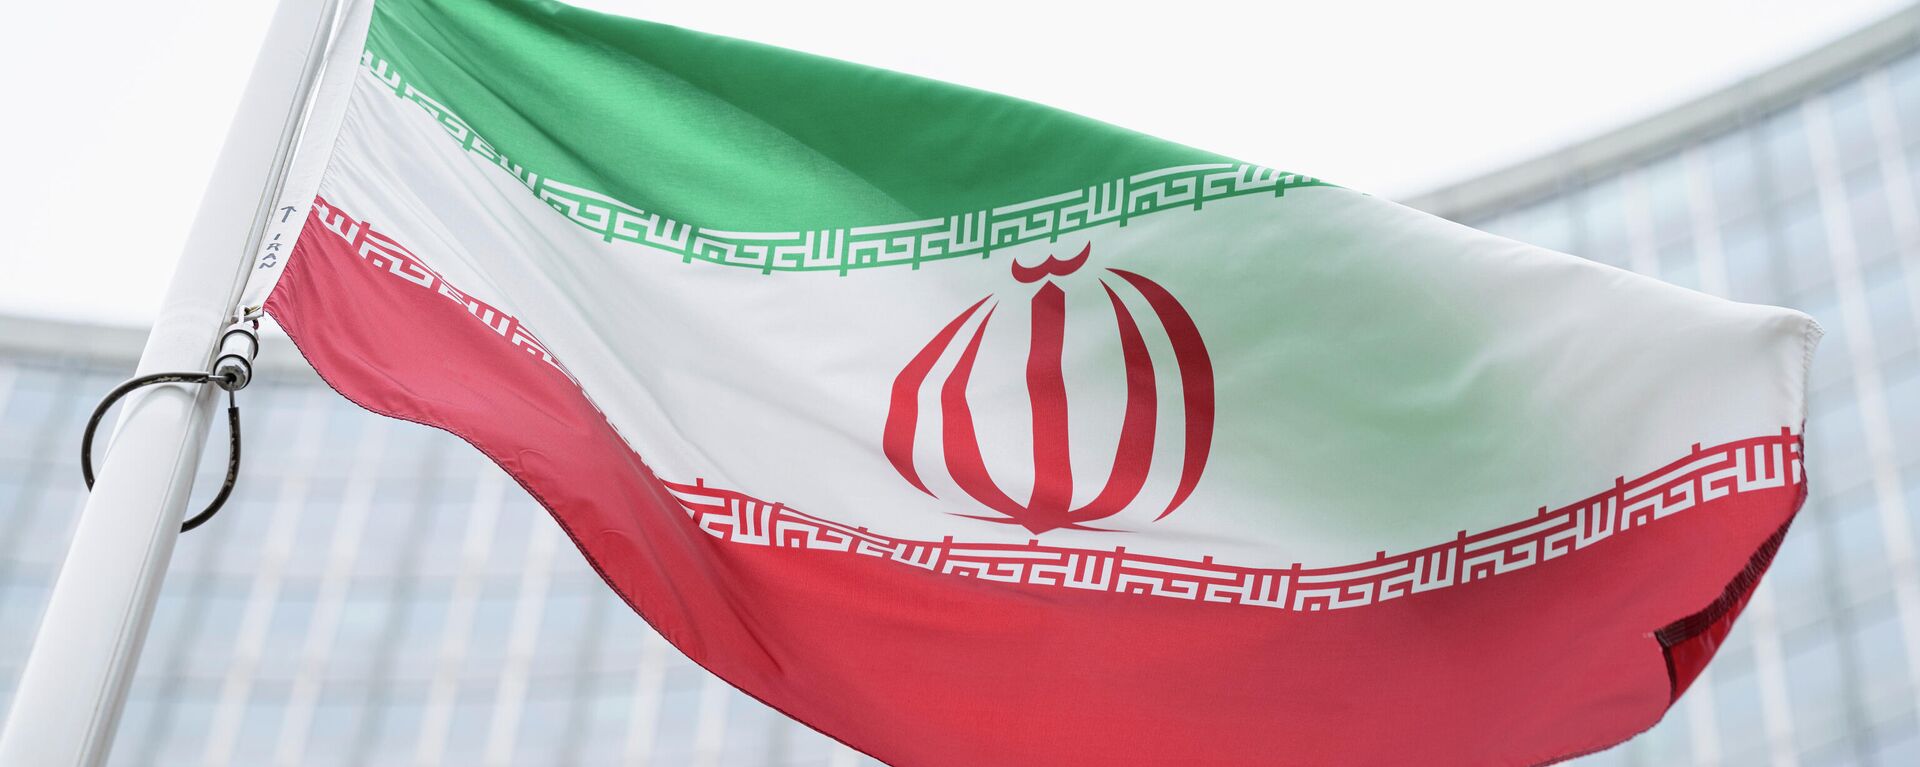 FILE - The flag of Iran waves in front of the the International Center building with the headquarters of the International Atomic Energy Agency, IAEA, in Vienna, AustriaI, May 24, 2021. On Monday, Nov. 29, 2021, negotiators are gathering in Vienna to resume efforts to revive Iran's 2015 nuclear deal with world powers, with hopes of quick progress muted after the arrival of a hard-line new government in Tehran led to a more than five-month hiatus. (AP Photo/Florian Schroetter, FILE) - Sputnik International, 1920, 02.11.2022